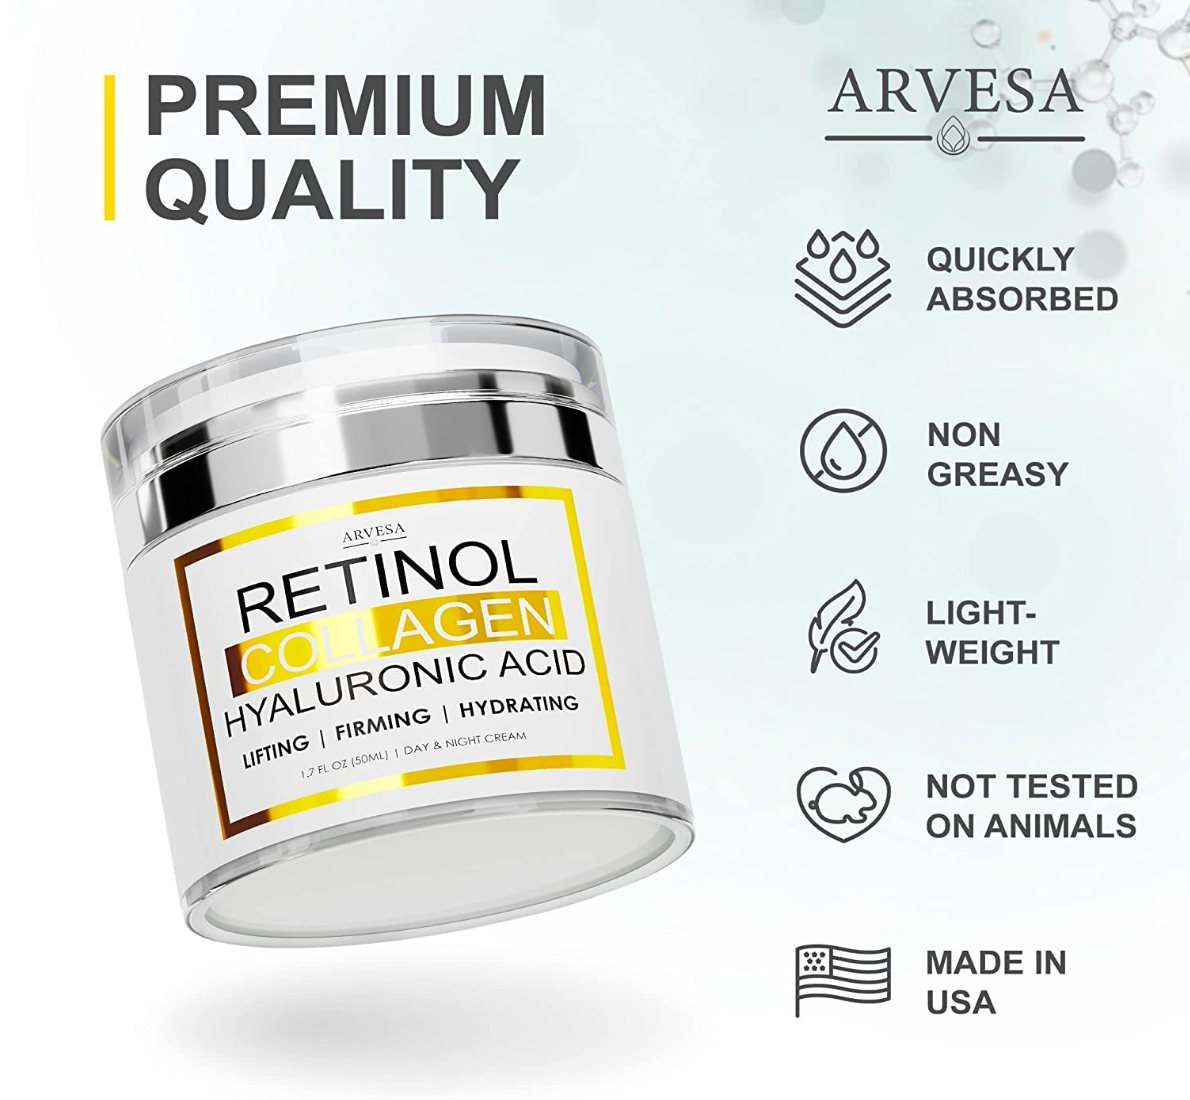 Retinol Cream for Face - Facial Moisturizer with Collagen Cream and Hyaluronic Acid - Anti Aging Face Cream - Day and Night Face Lotion for Women and Men - Hydrating Wrinkle Cream for Face - All Skin Types